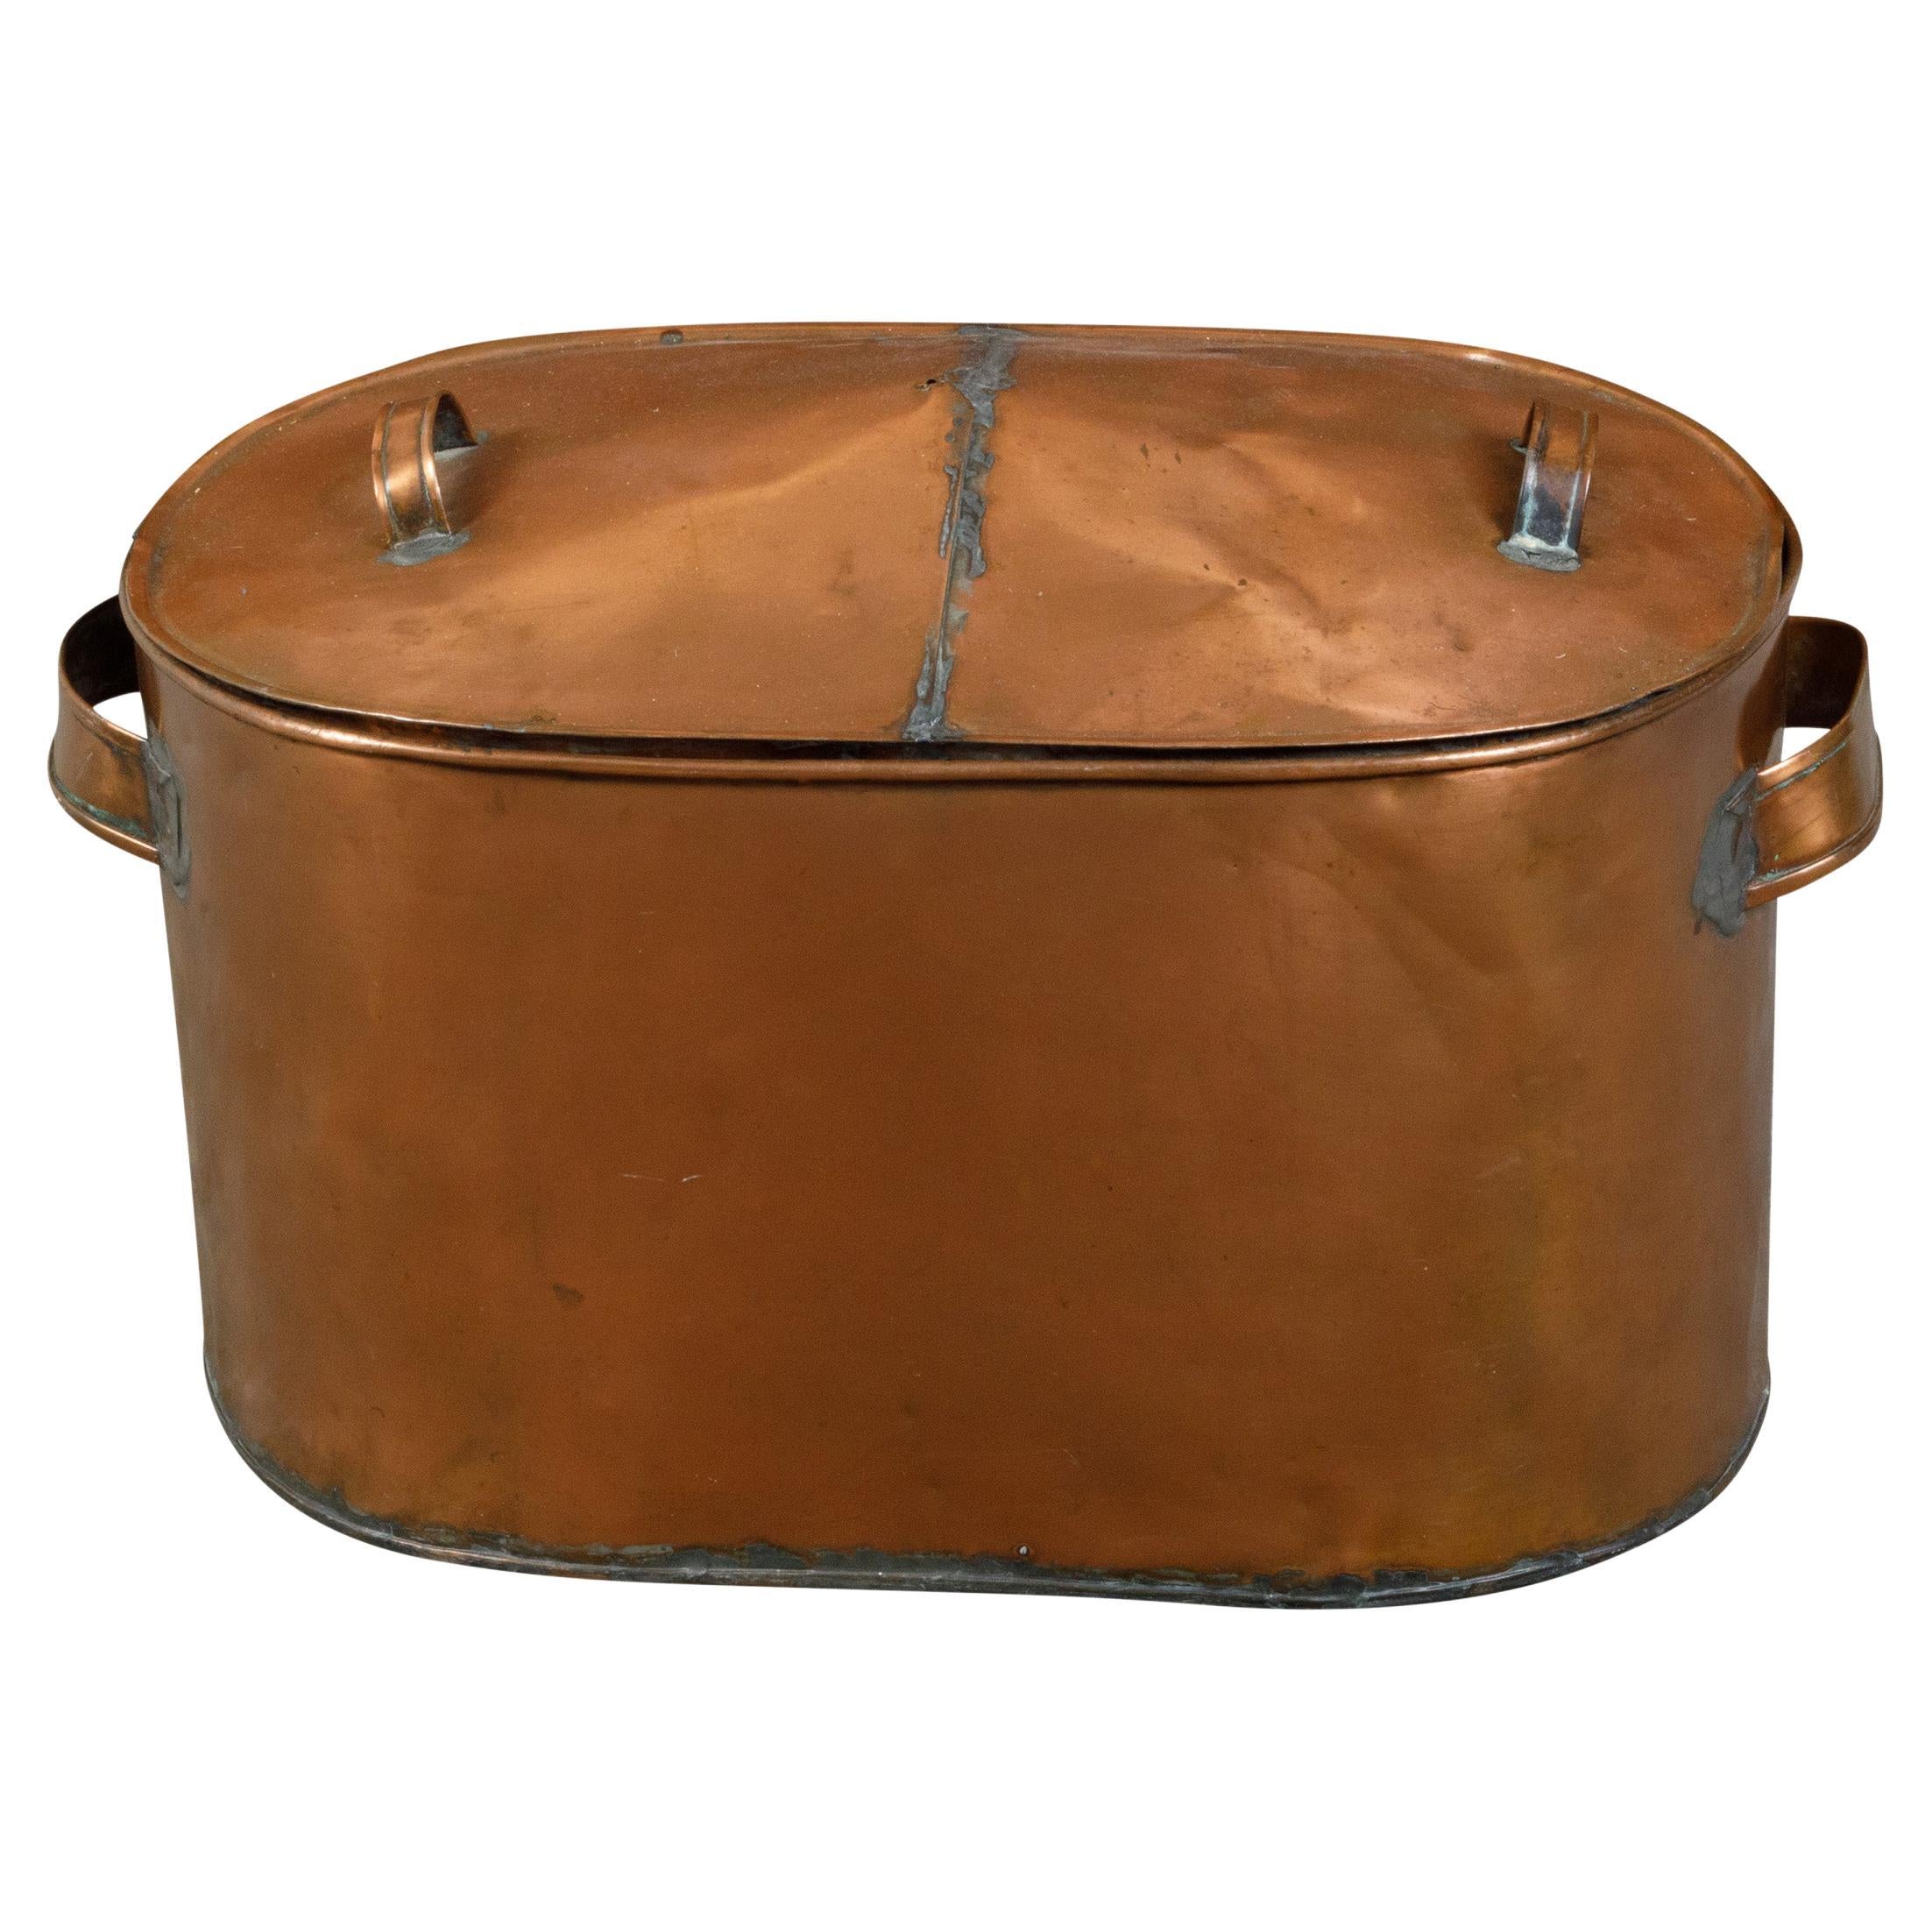 https://a.1stdibscdn.com/large-english-1930s-copper-braising-pan-with-handles-and-weathered-patina-for-sale/f_8367/f_271942721643808777726/f_27194272_1643808778481_bg_processed.jpg